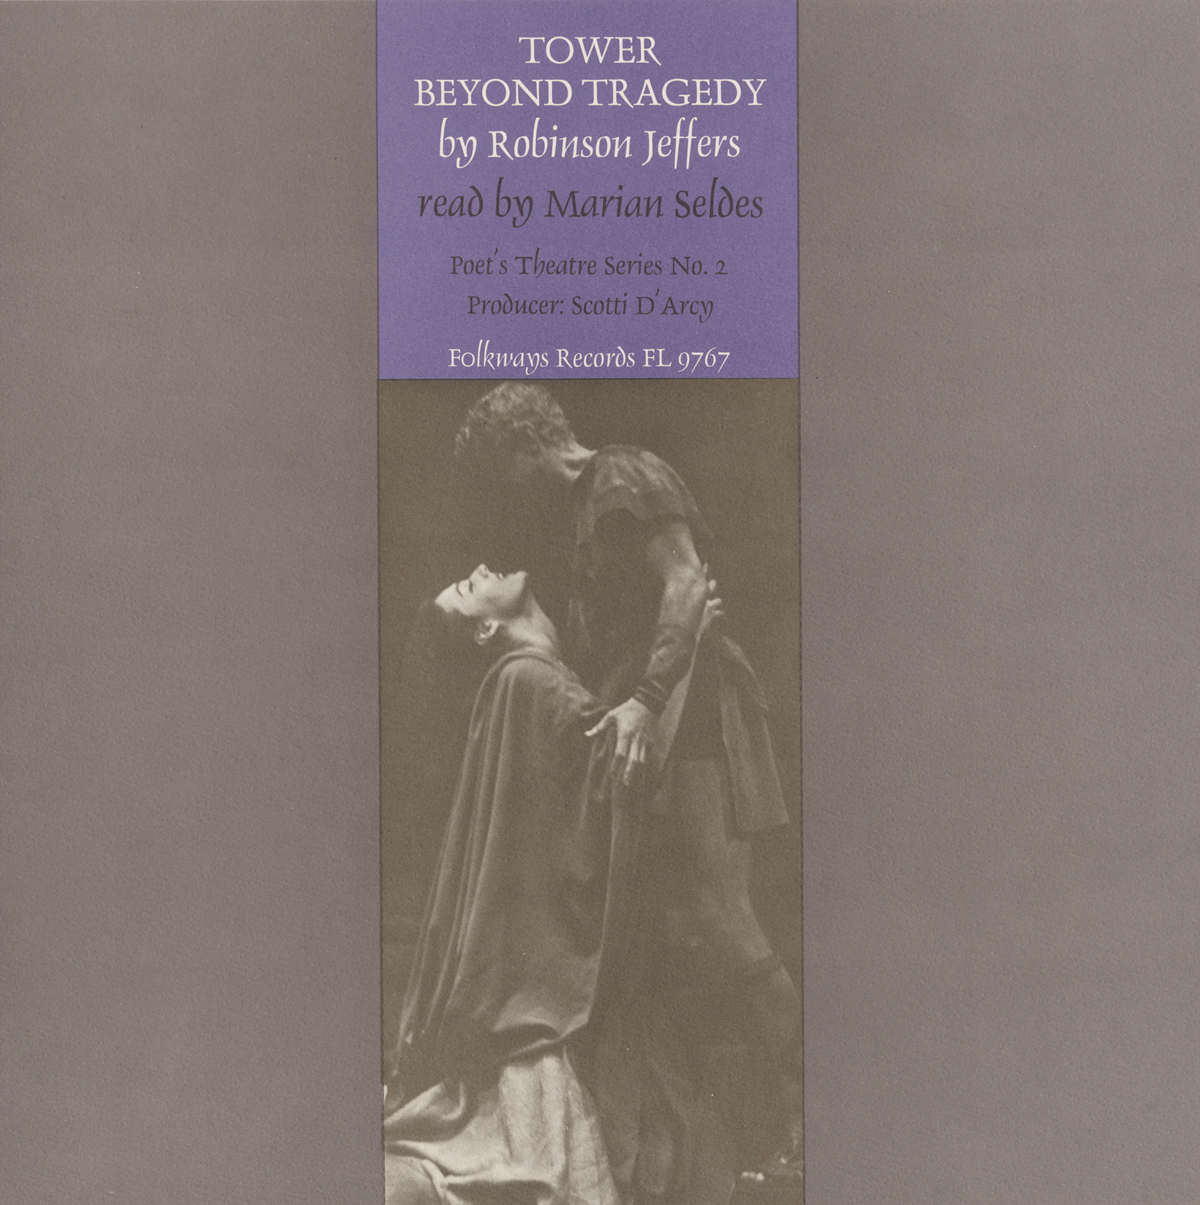 TOWER BEYOND TRAGEDY: BY ROBINSON JEFFERS